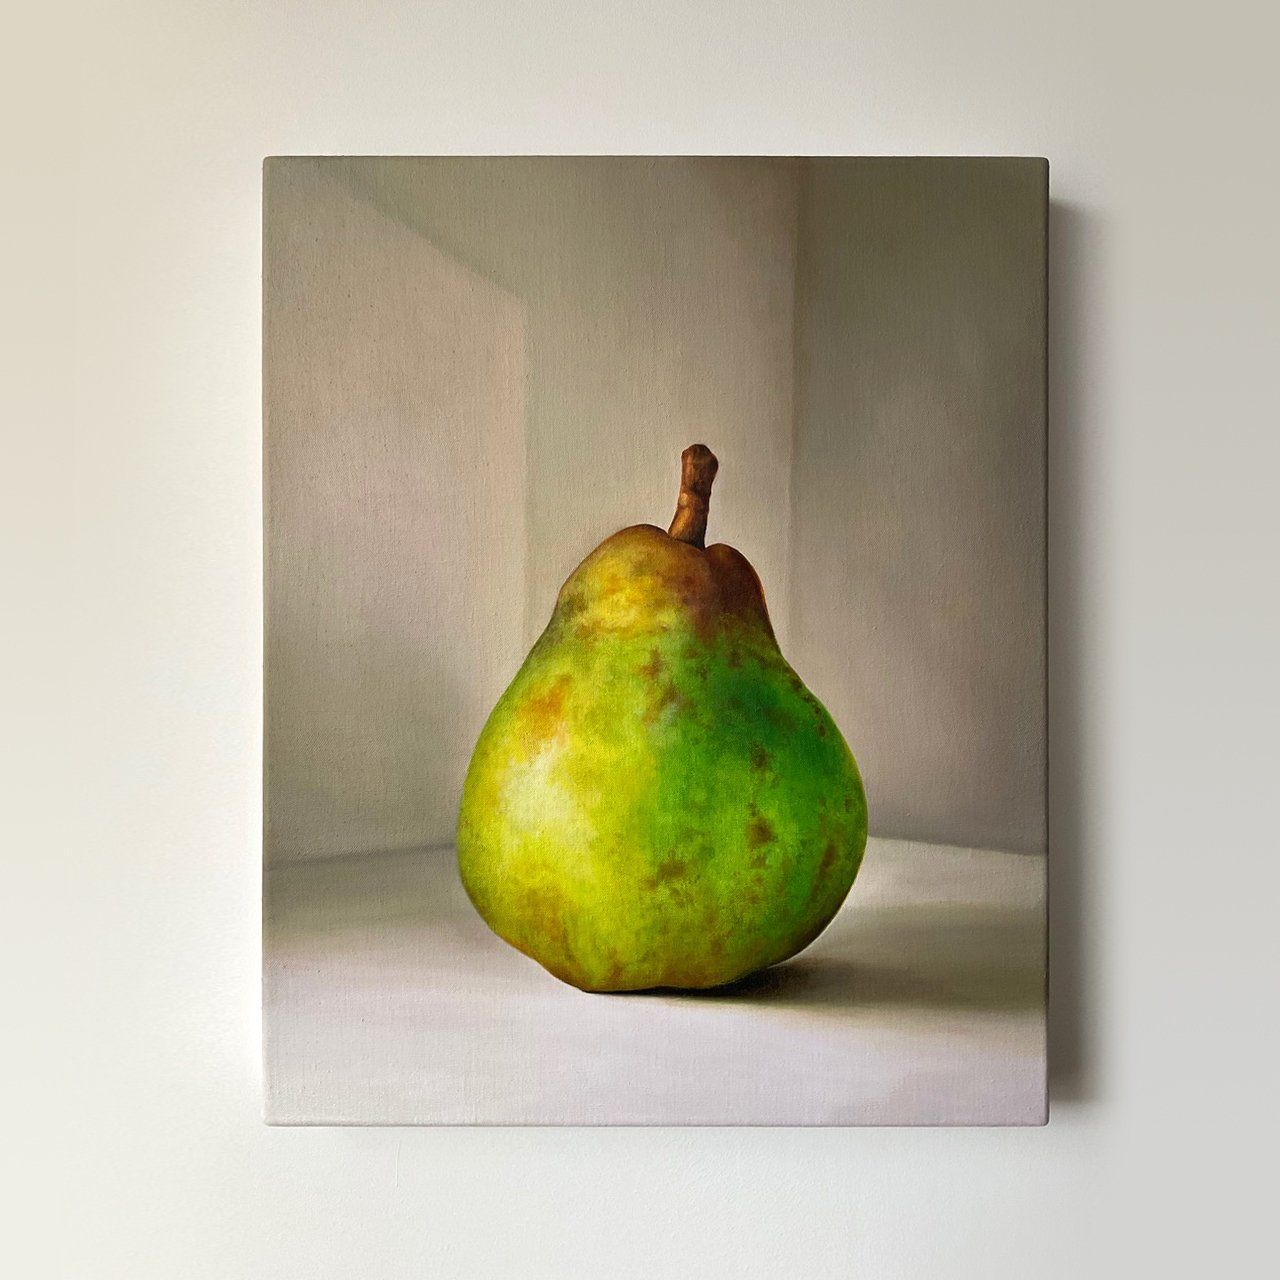 Summer Pear II  2020, Oil on linen, by Sarah Wood